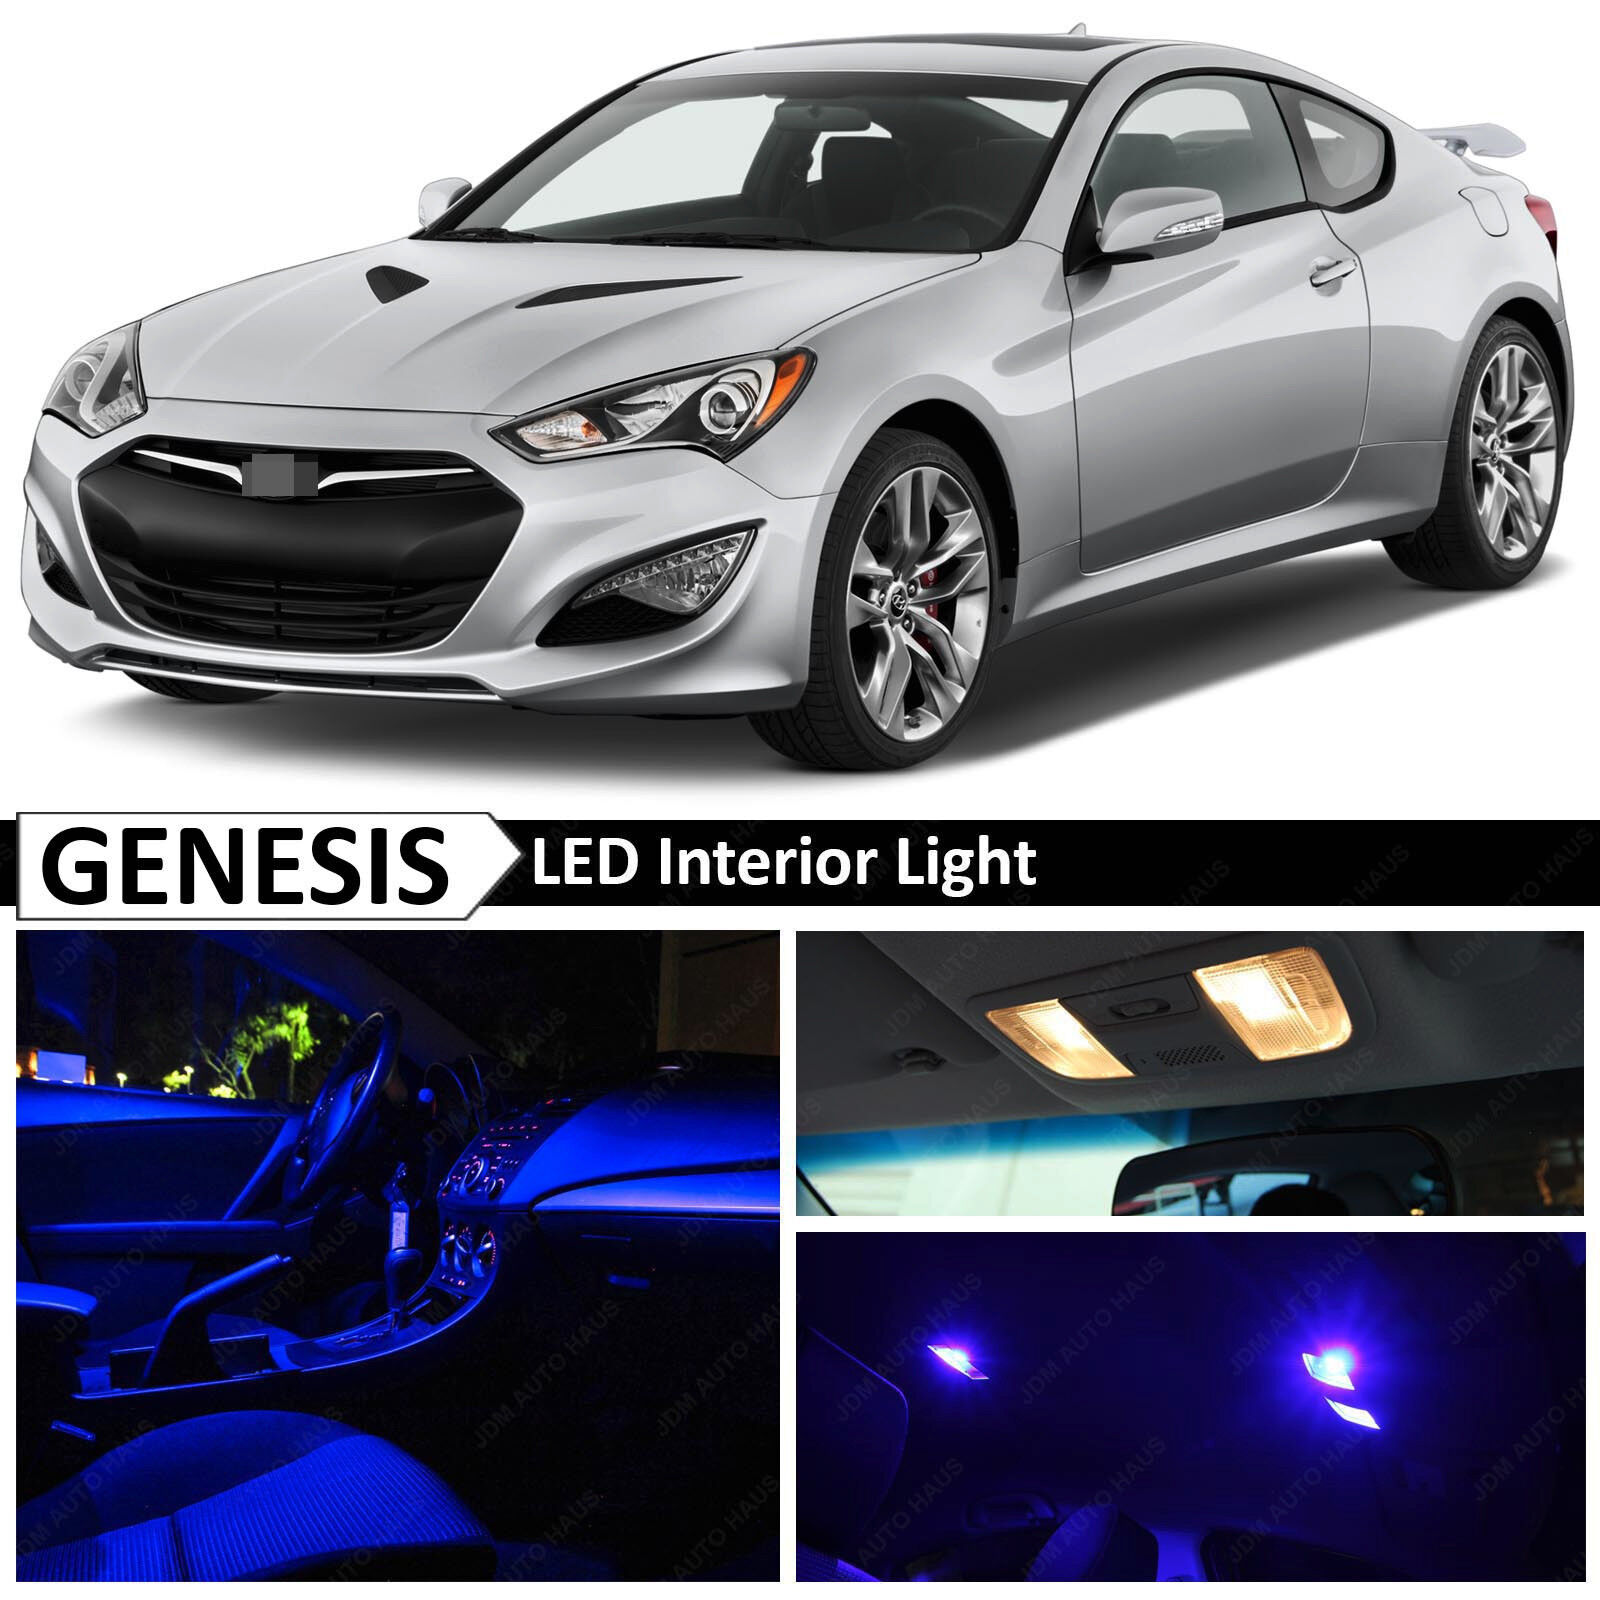 10x Blue LED Lights Interior Package For 2010-2015 Genesis Coupe